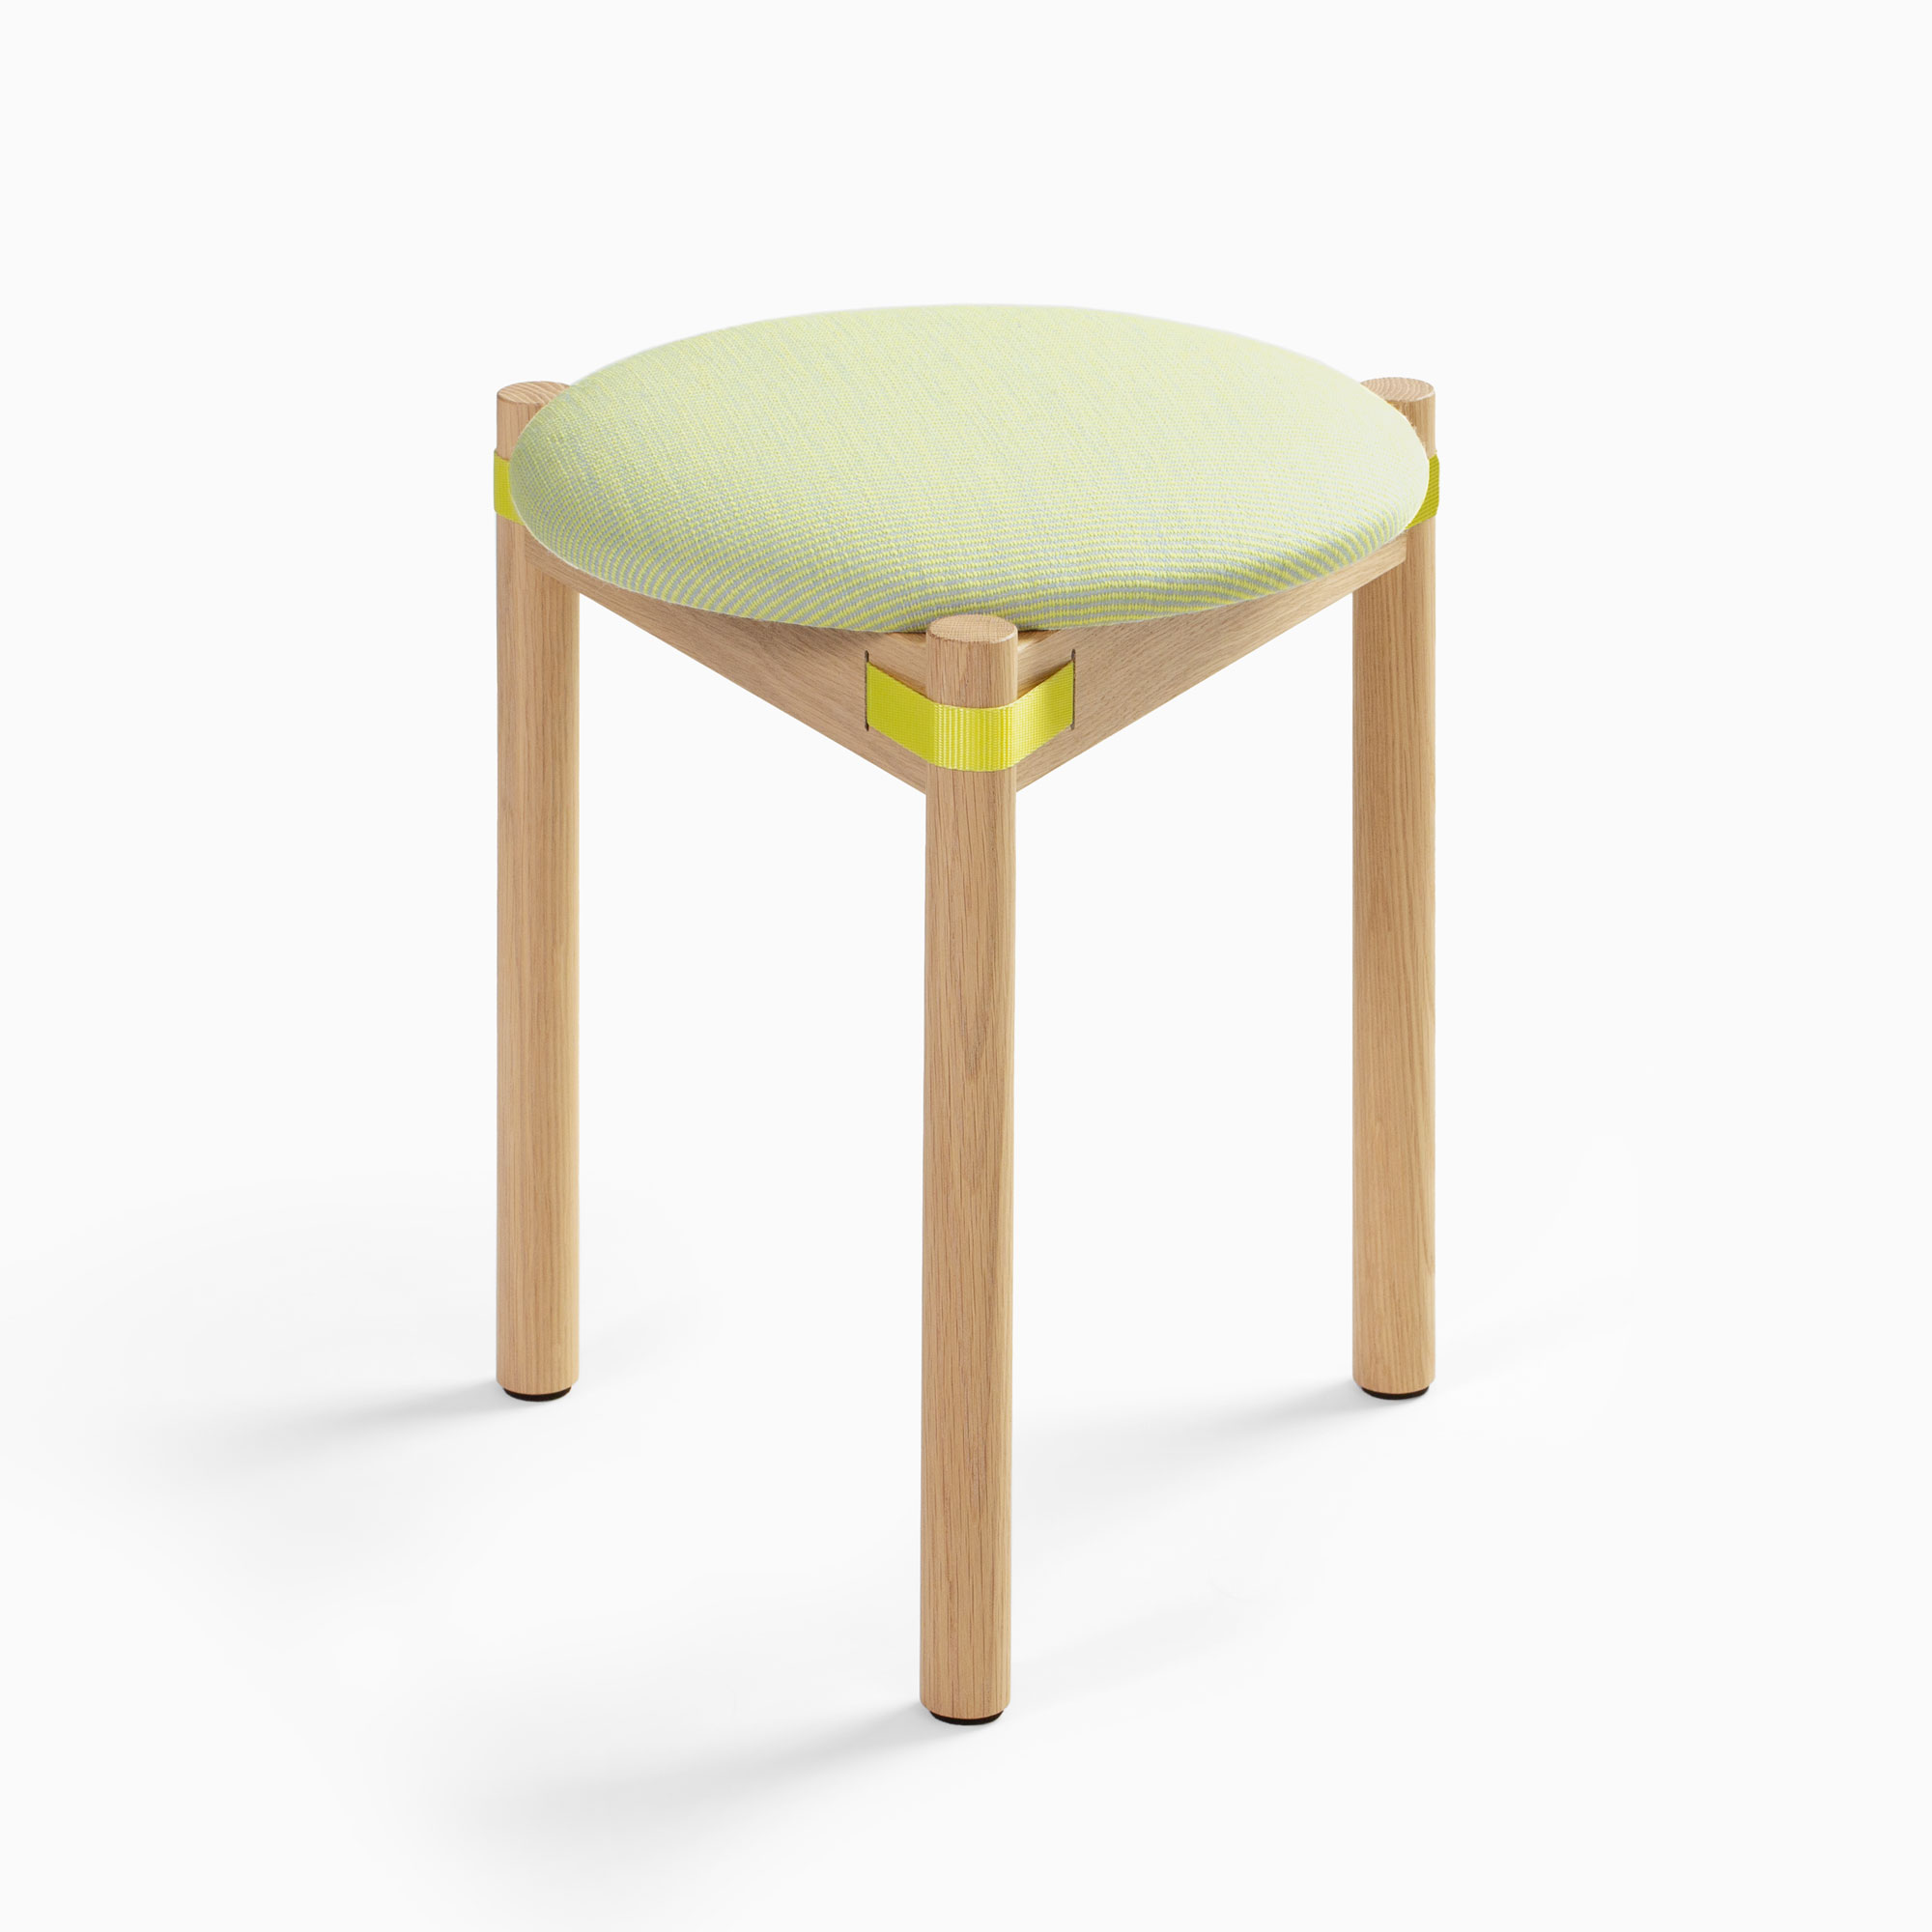 Combines upholstered stool